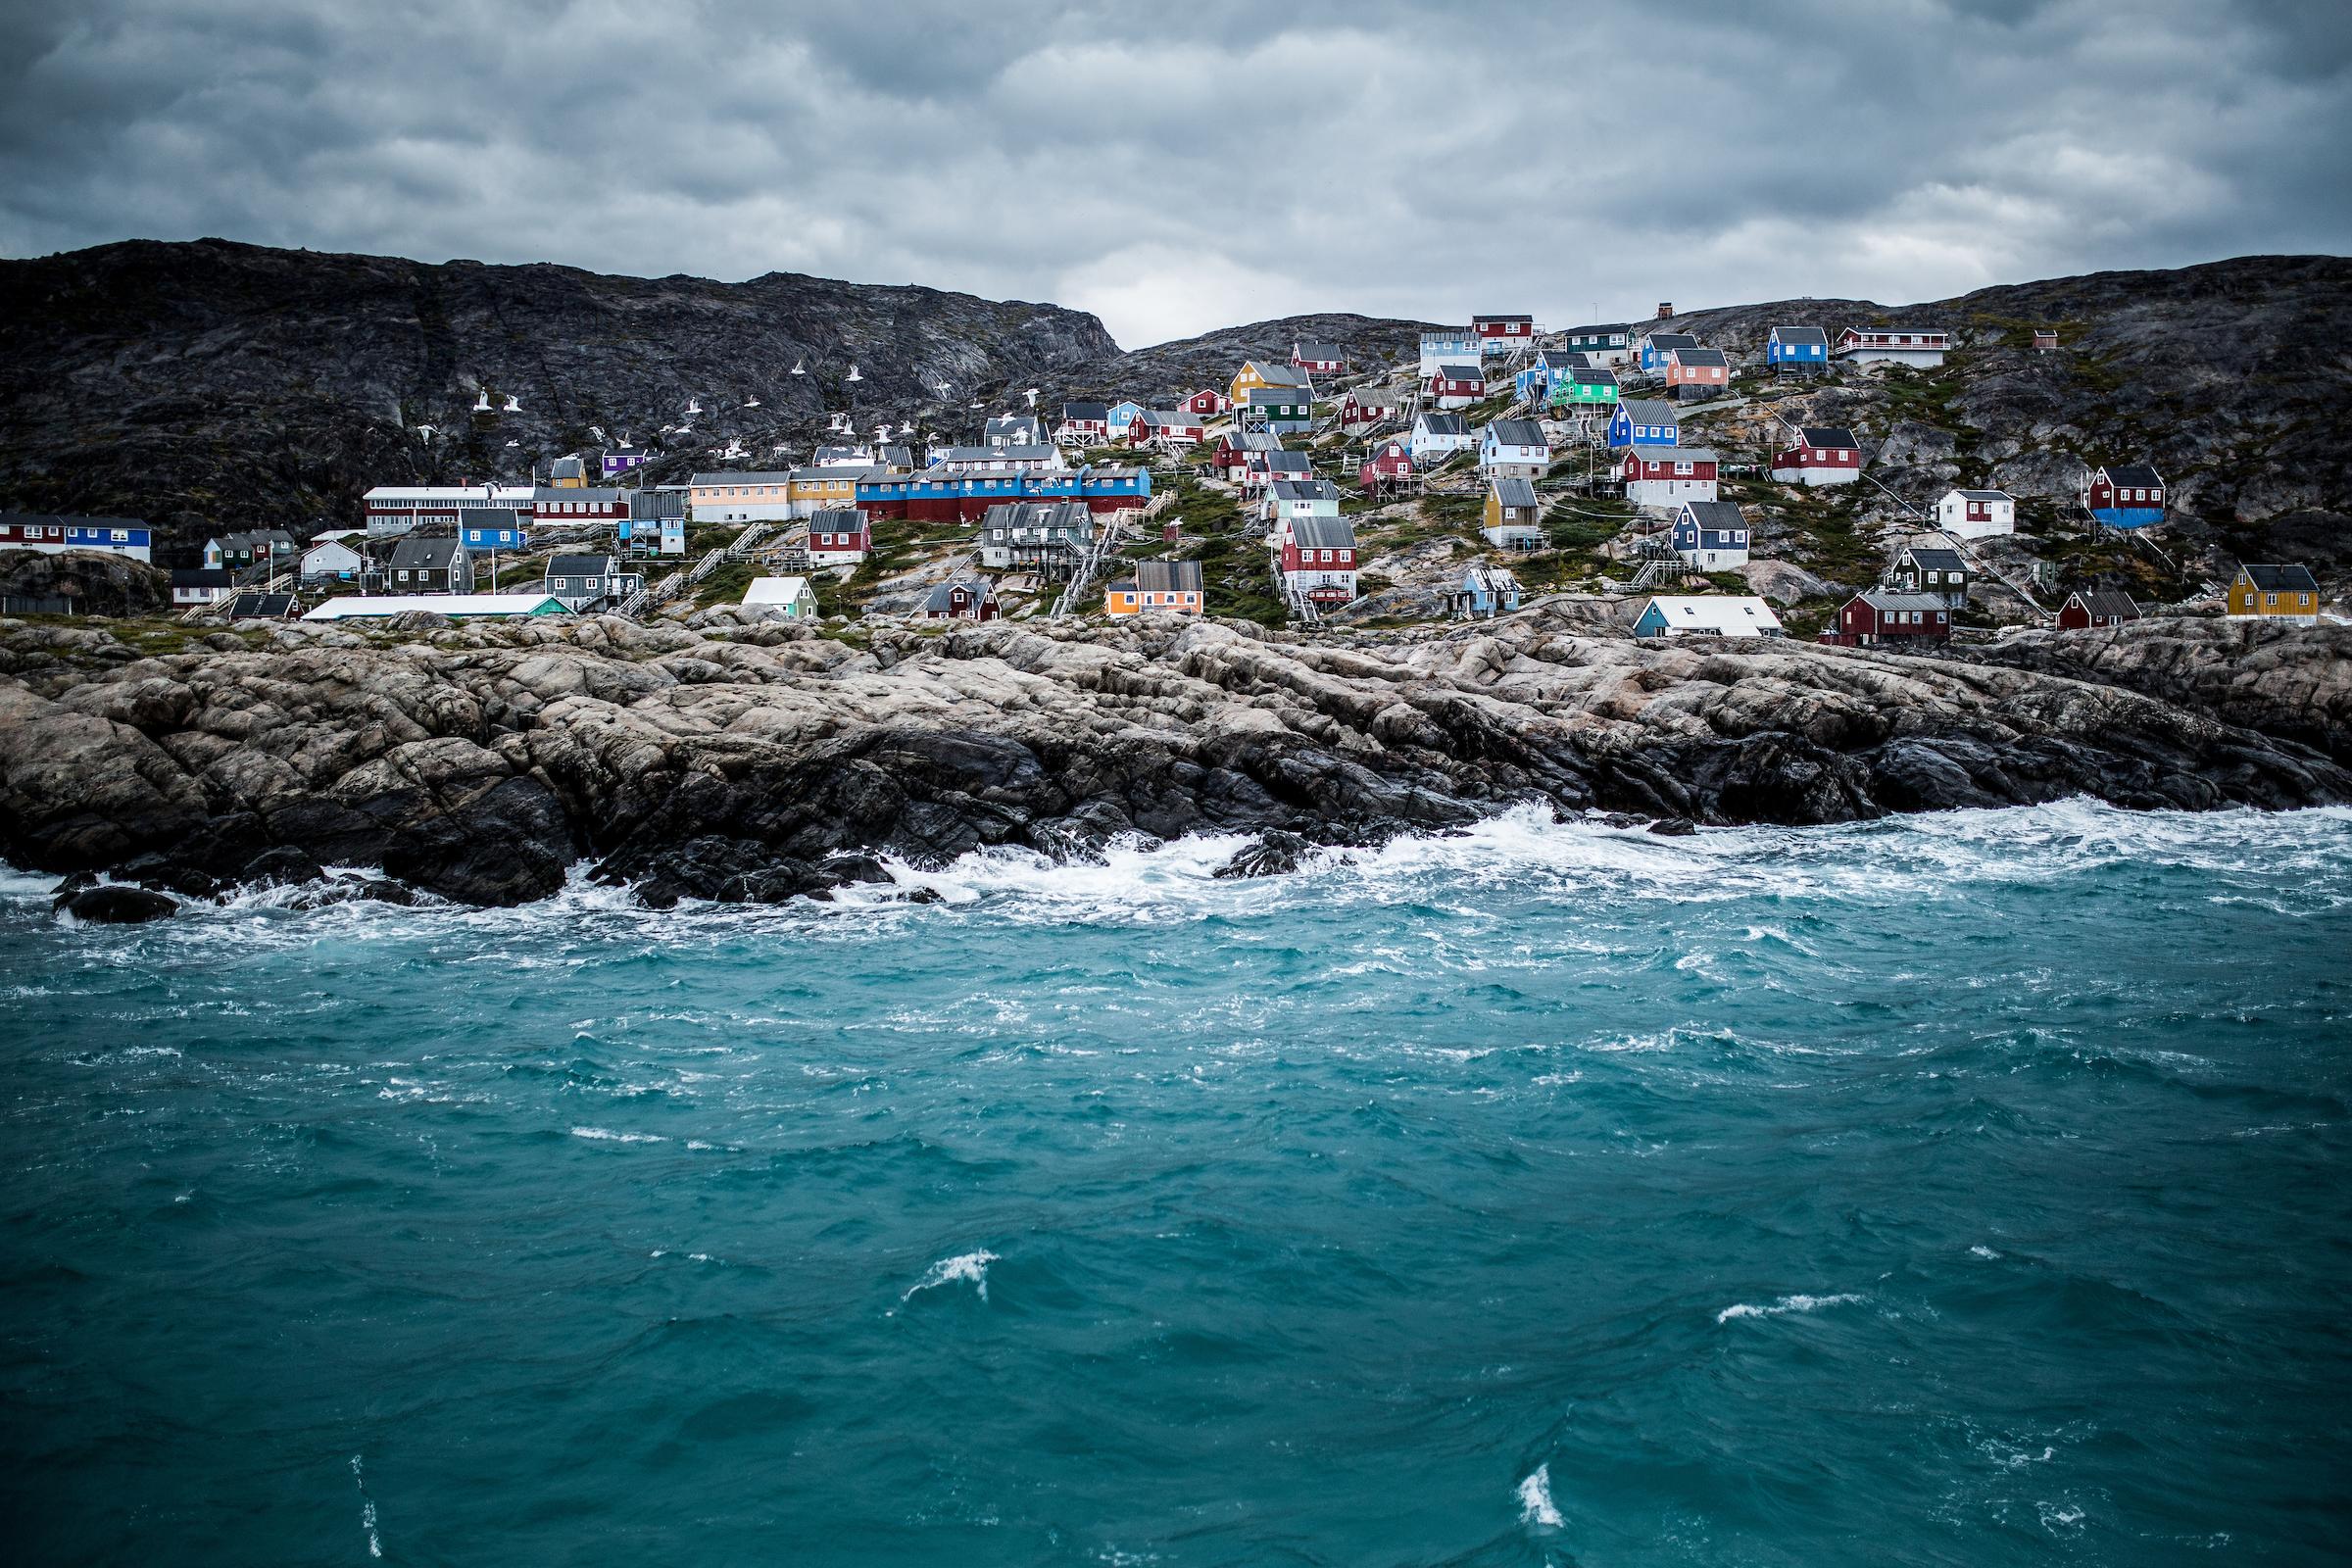 Greenland's coastline is scattered with colourful, pretty towns